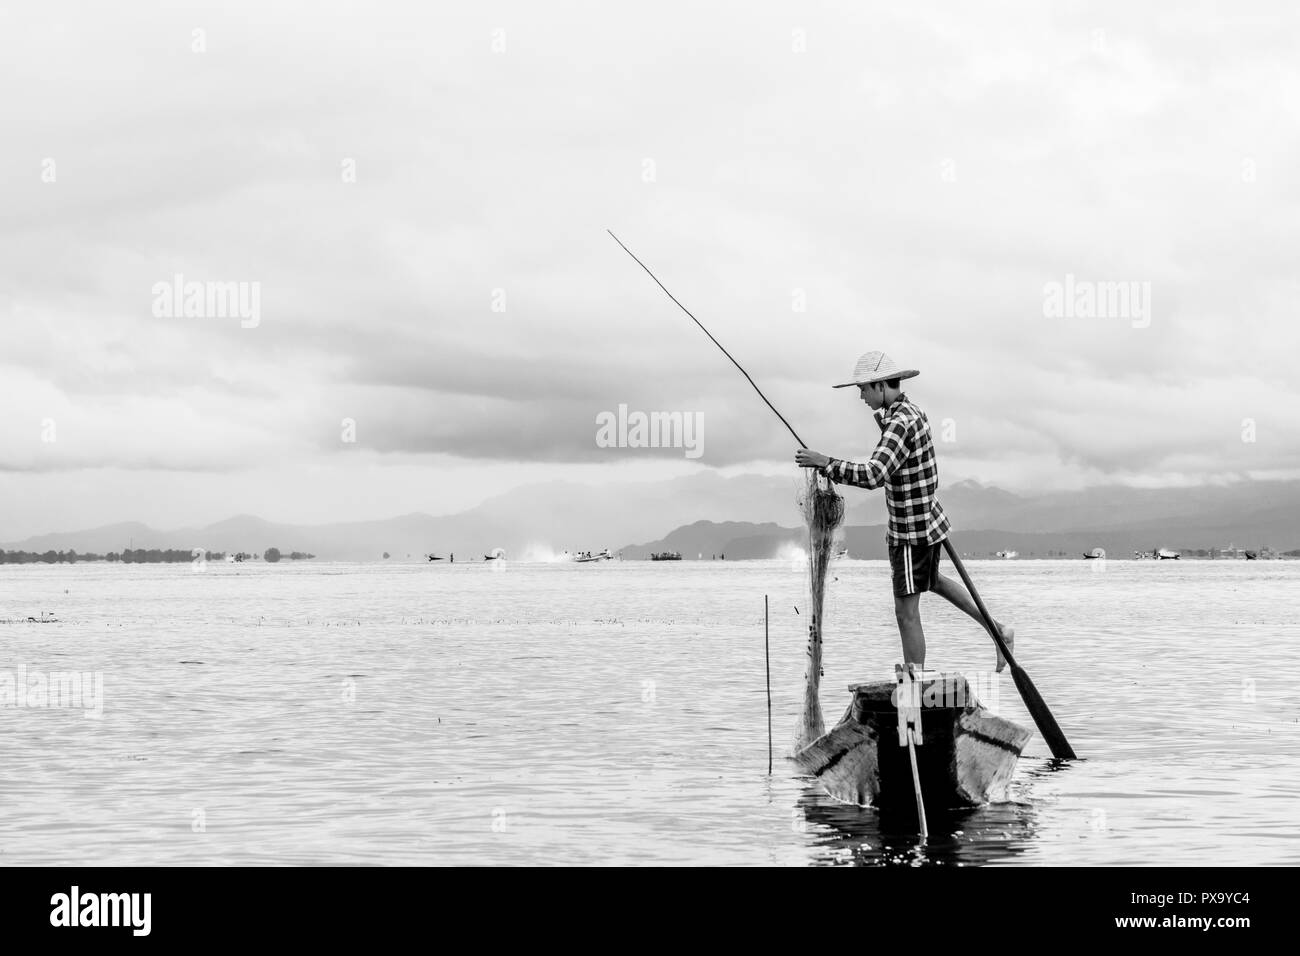 Travel local young Burmese male fisherman wearing checked shirt, using stick and net to fish, balancing on one foot on boat, Inle Lake Myanmar, Burma Stock Photo